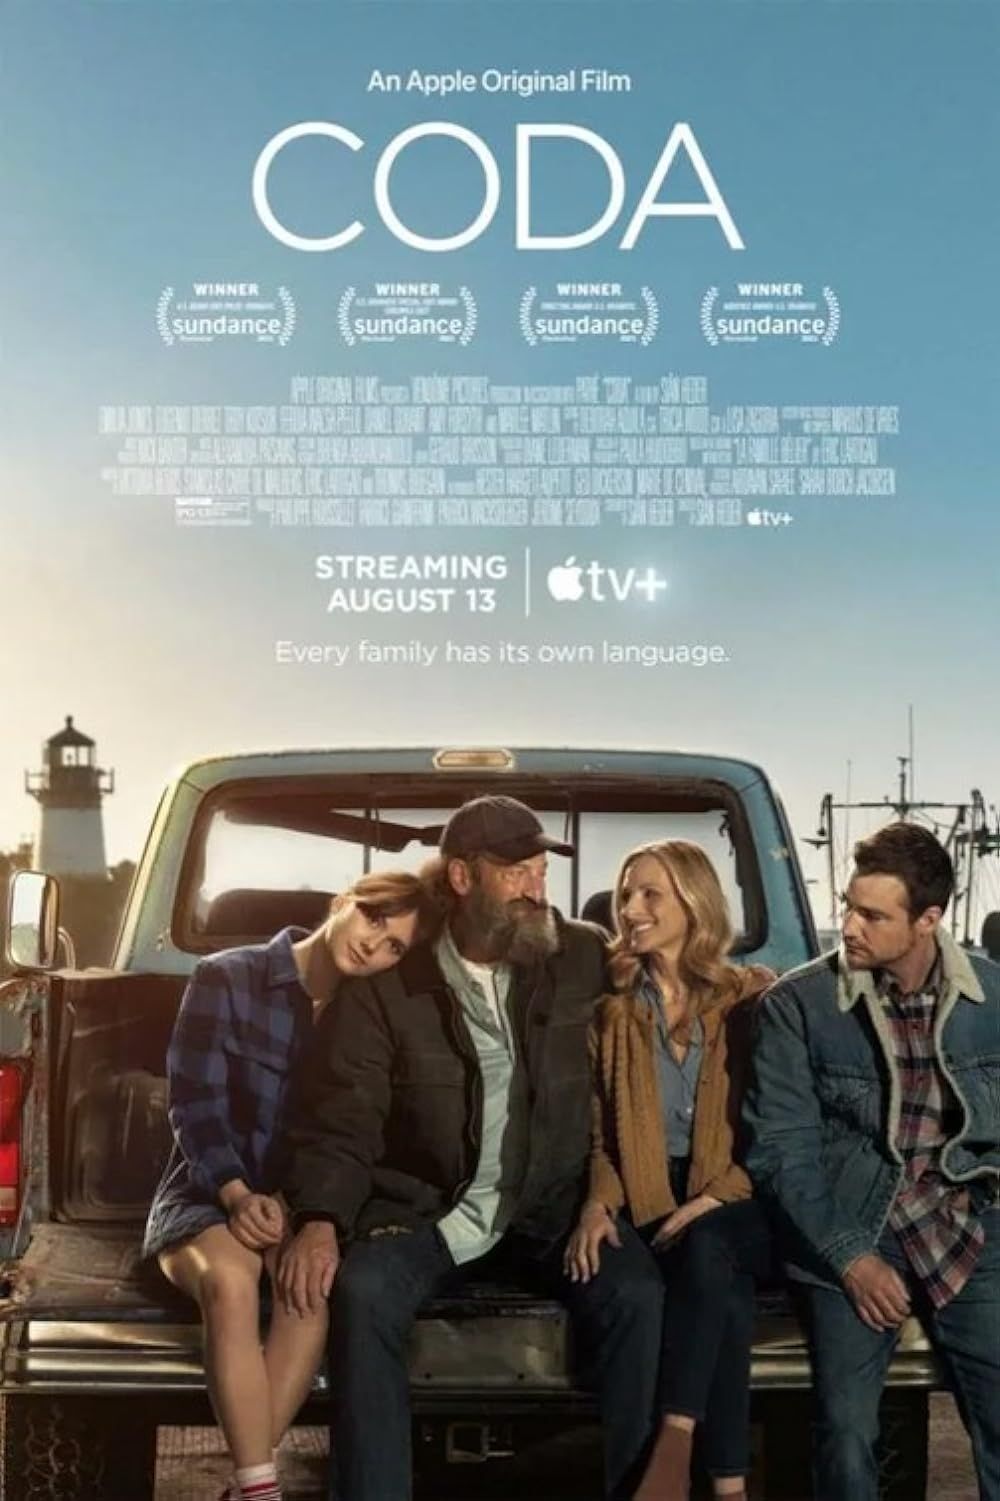 The Rossi family sits together on the back of a truck on the CODA poster